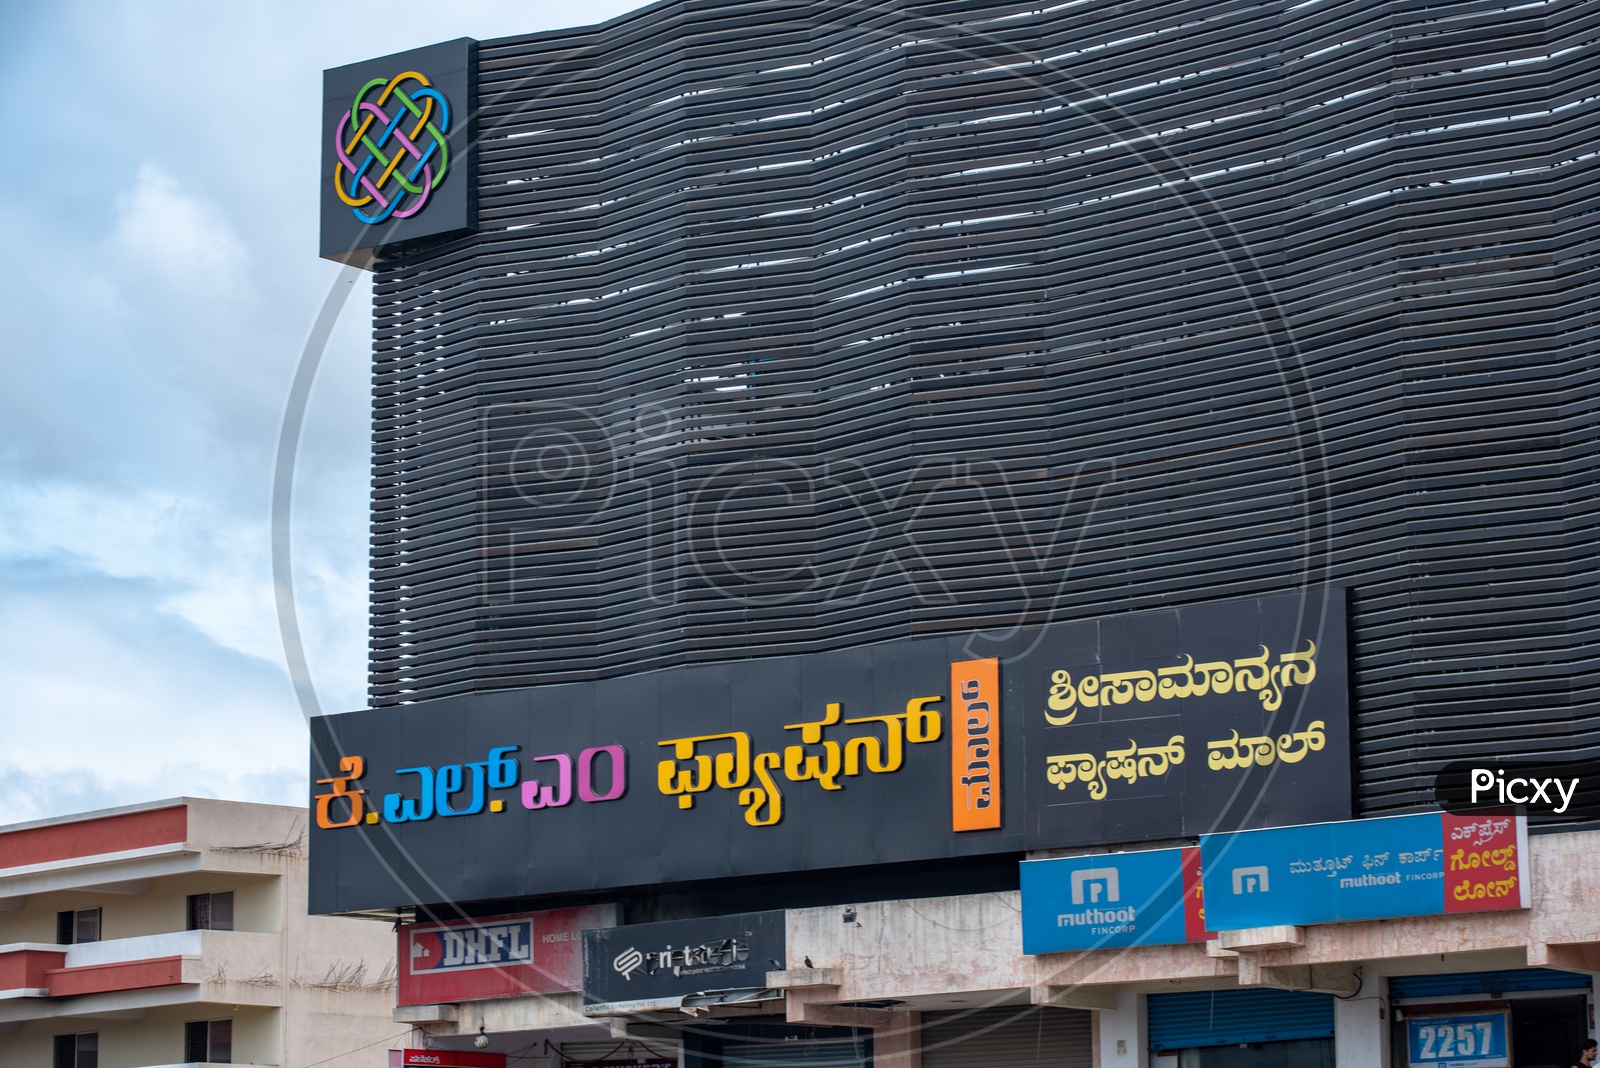 KLM FASHION mall name board on the store in Kannada